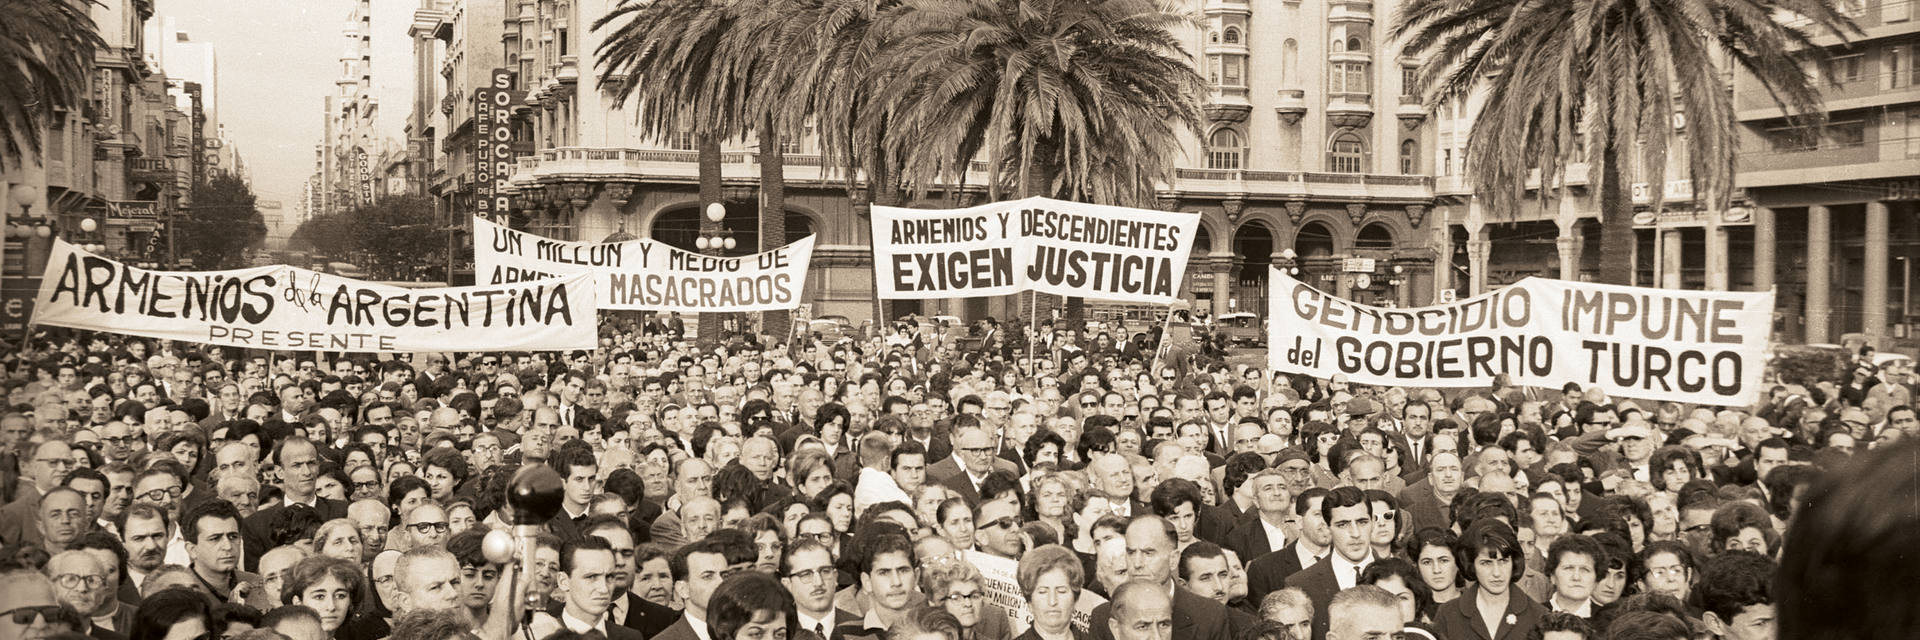 On April 20, 1965, Uruguay became the first nation in the world to recognize the Armenian Genocide.